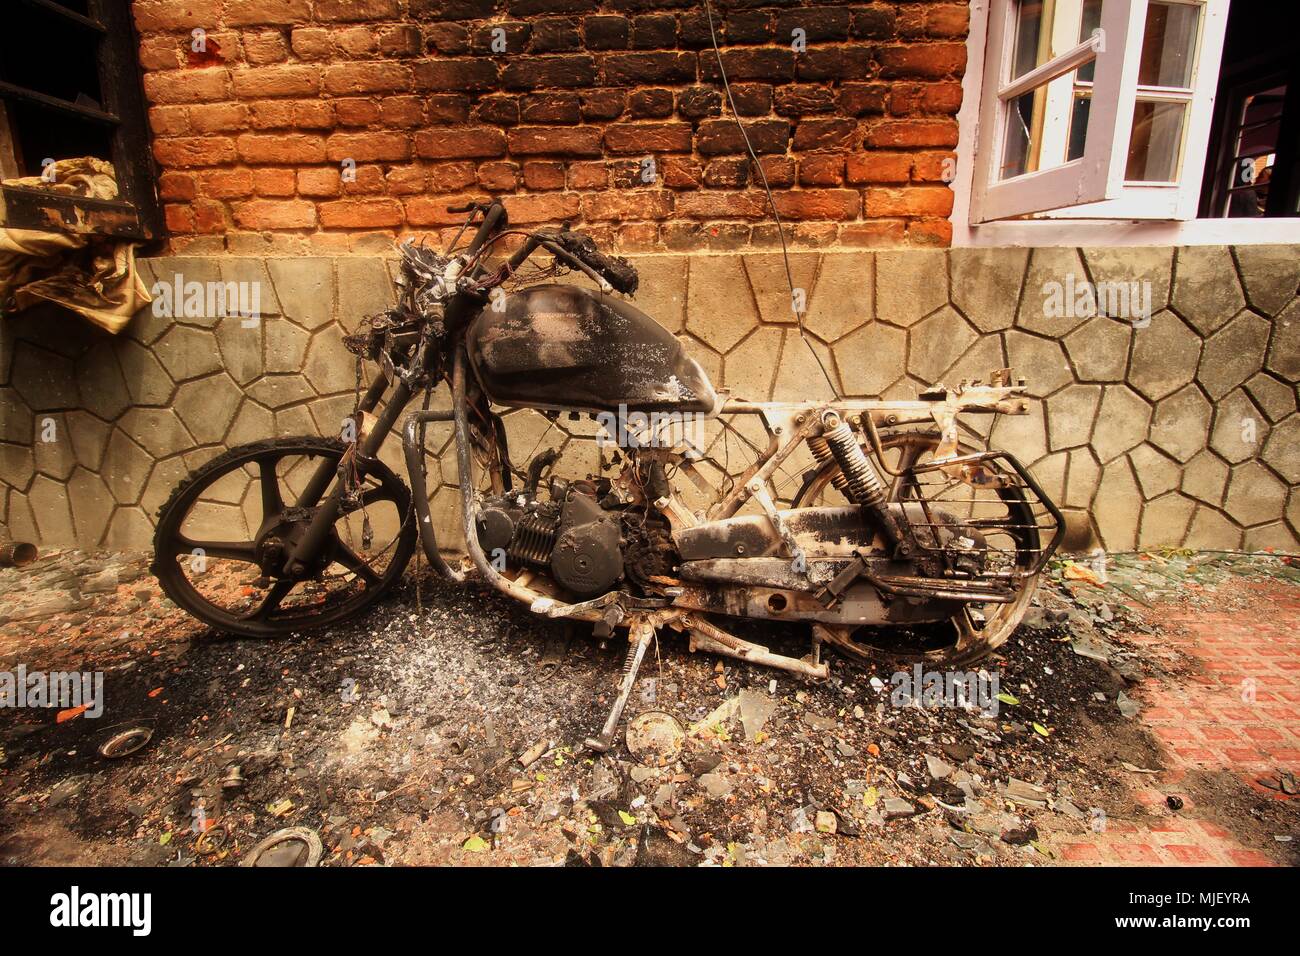 May 5, 2018 - Srinagar, Jammu and Kashmir, India - SRINAGAR, KASHMIR, INDIA-MAY 05: A motorcycle damaged during the gun-battle is seen in Srinagar the summer of Indian controlled Kashmir on May 05, 2018. Four people including a protester and three rebels were killed during a gun-battle between rebels and Indian forces in Chattabal area of Srinagar. Massive clashes erupt across Srinagar after the news about the trapping of rebels and killing of protester spread across the city. Police fired teargas canisters, pellets, stun grenades and rubber coated bullets to disperse the angry crowd. (Credit Stock Photo